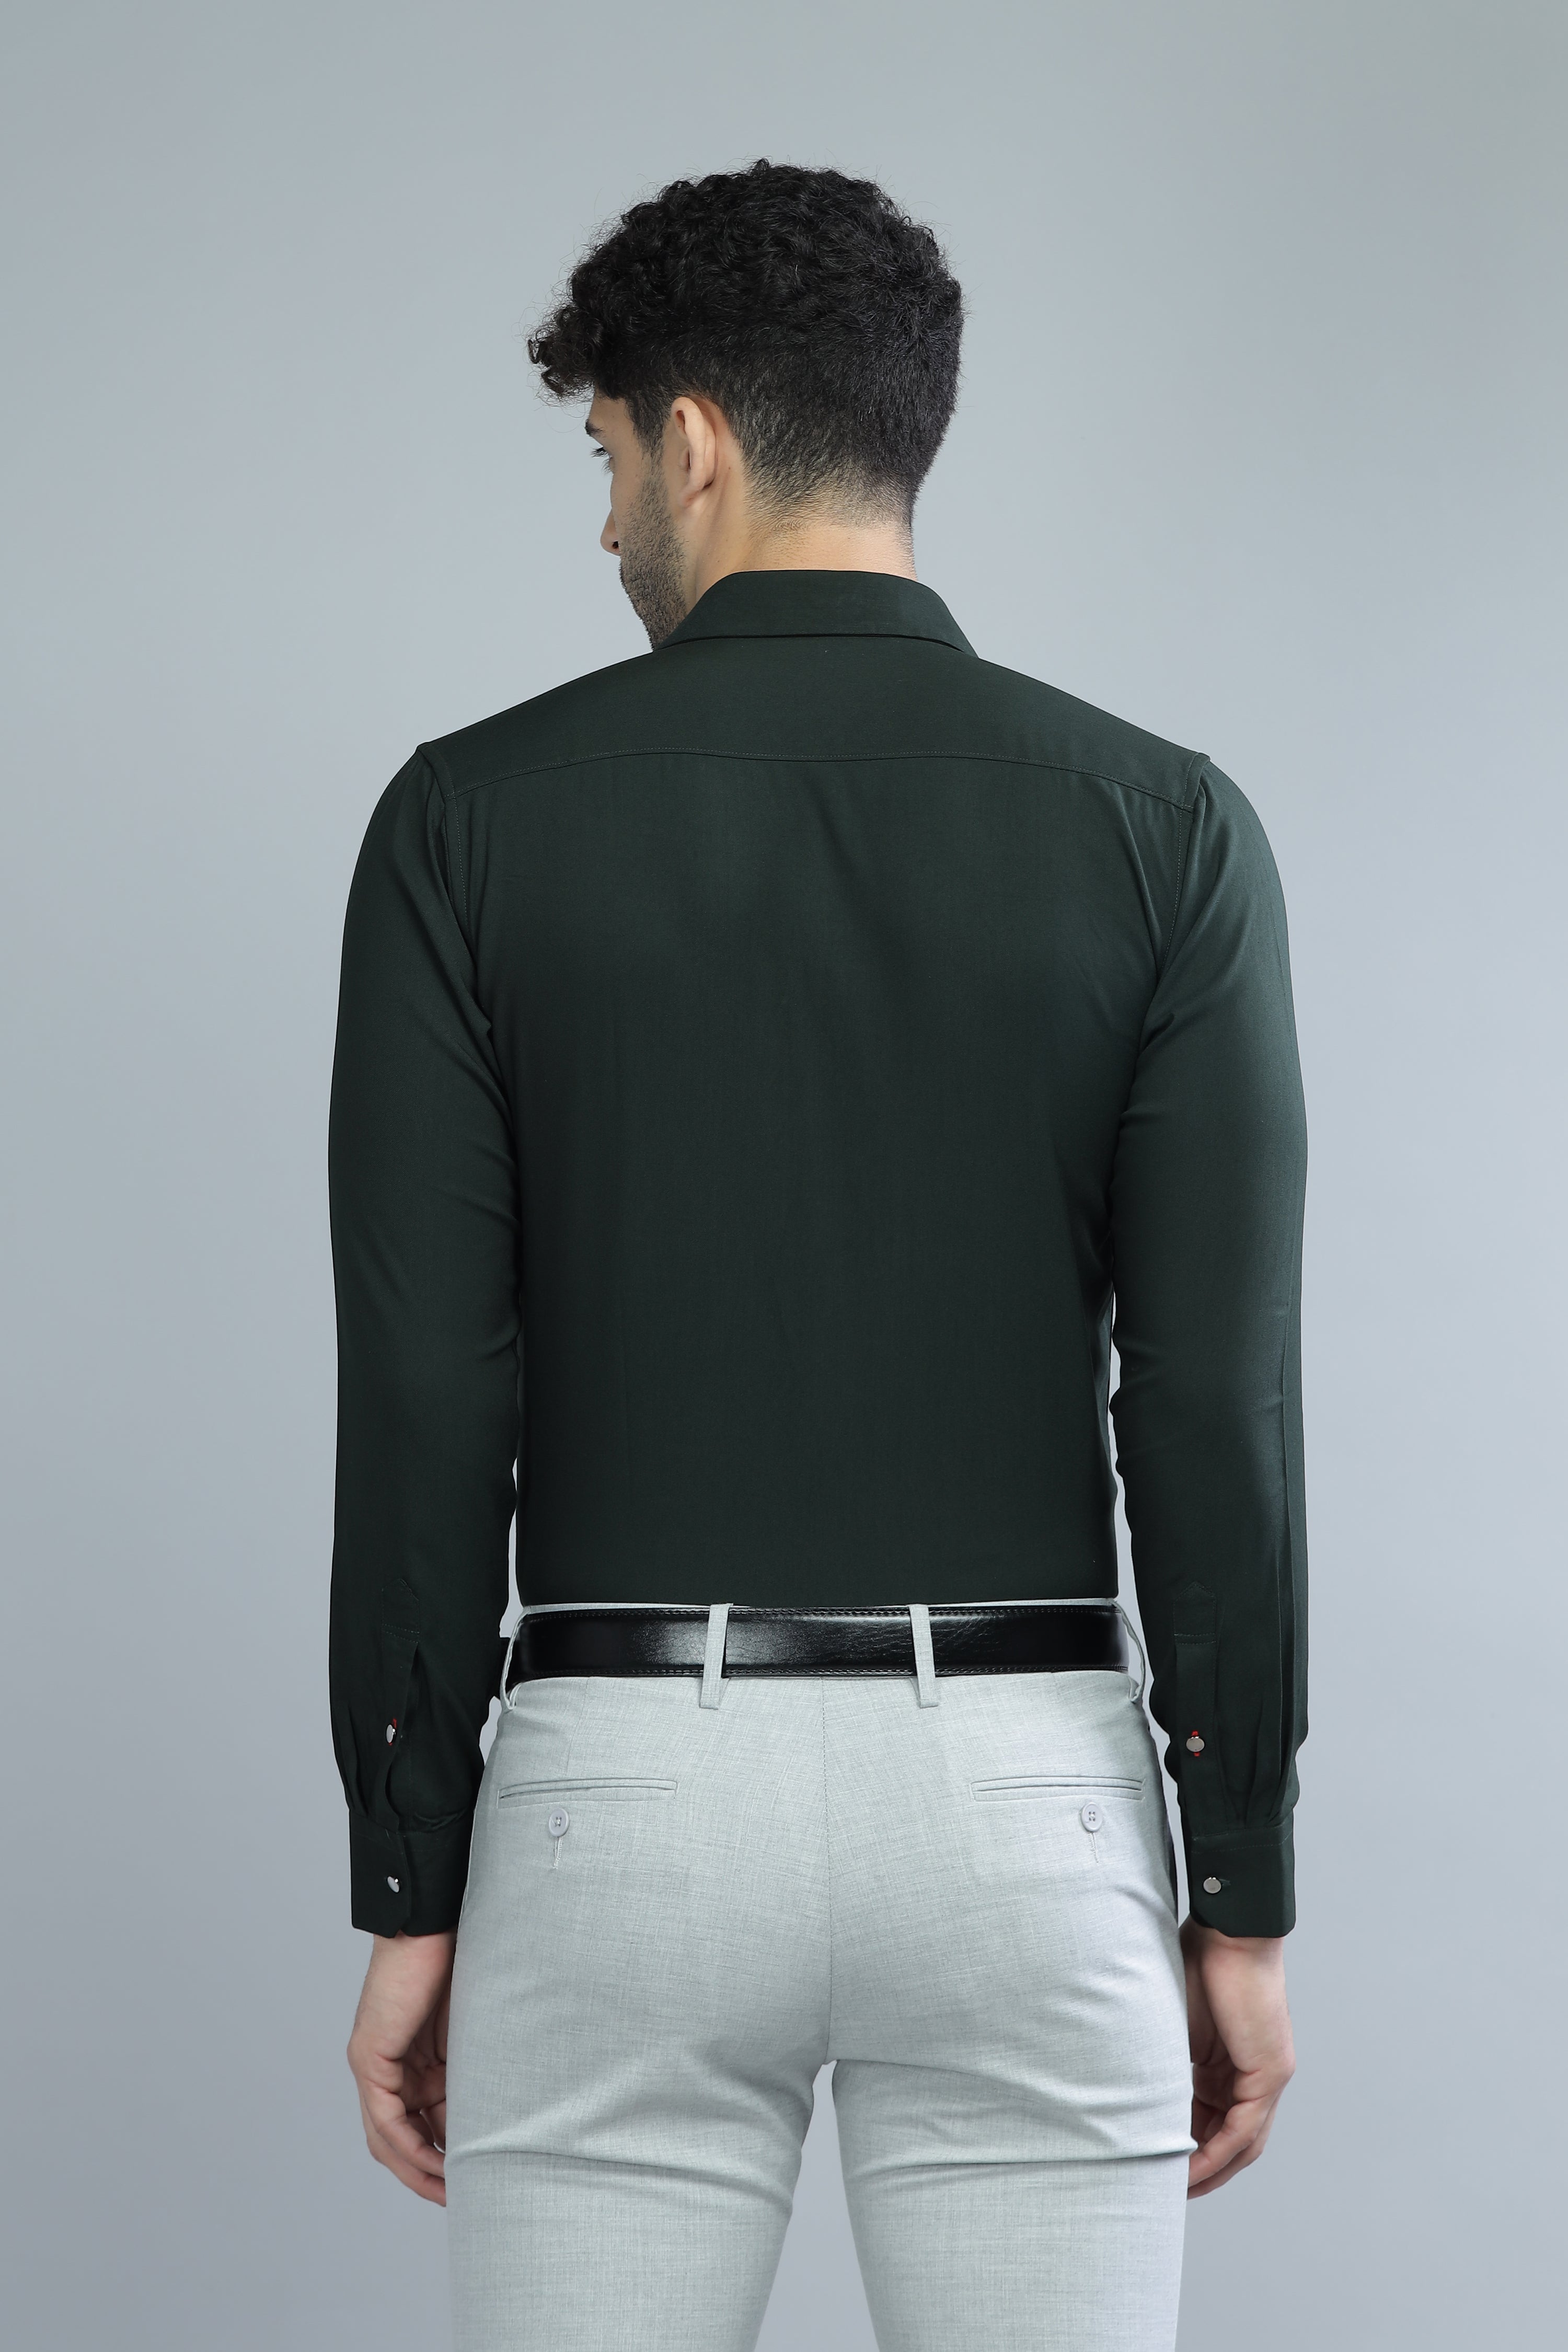 What color pants would match better with a green or black shirt? - Quora